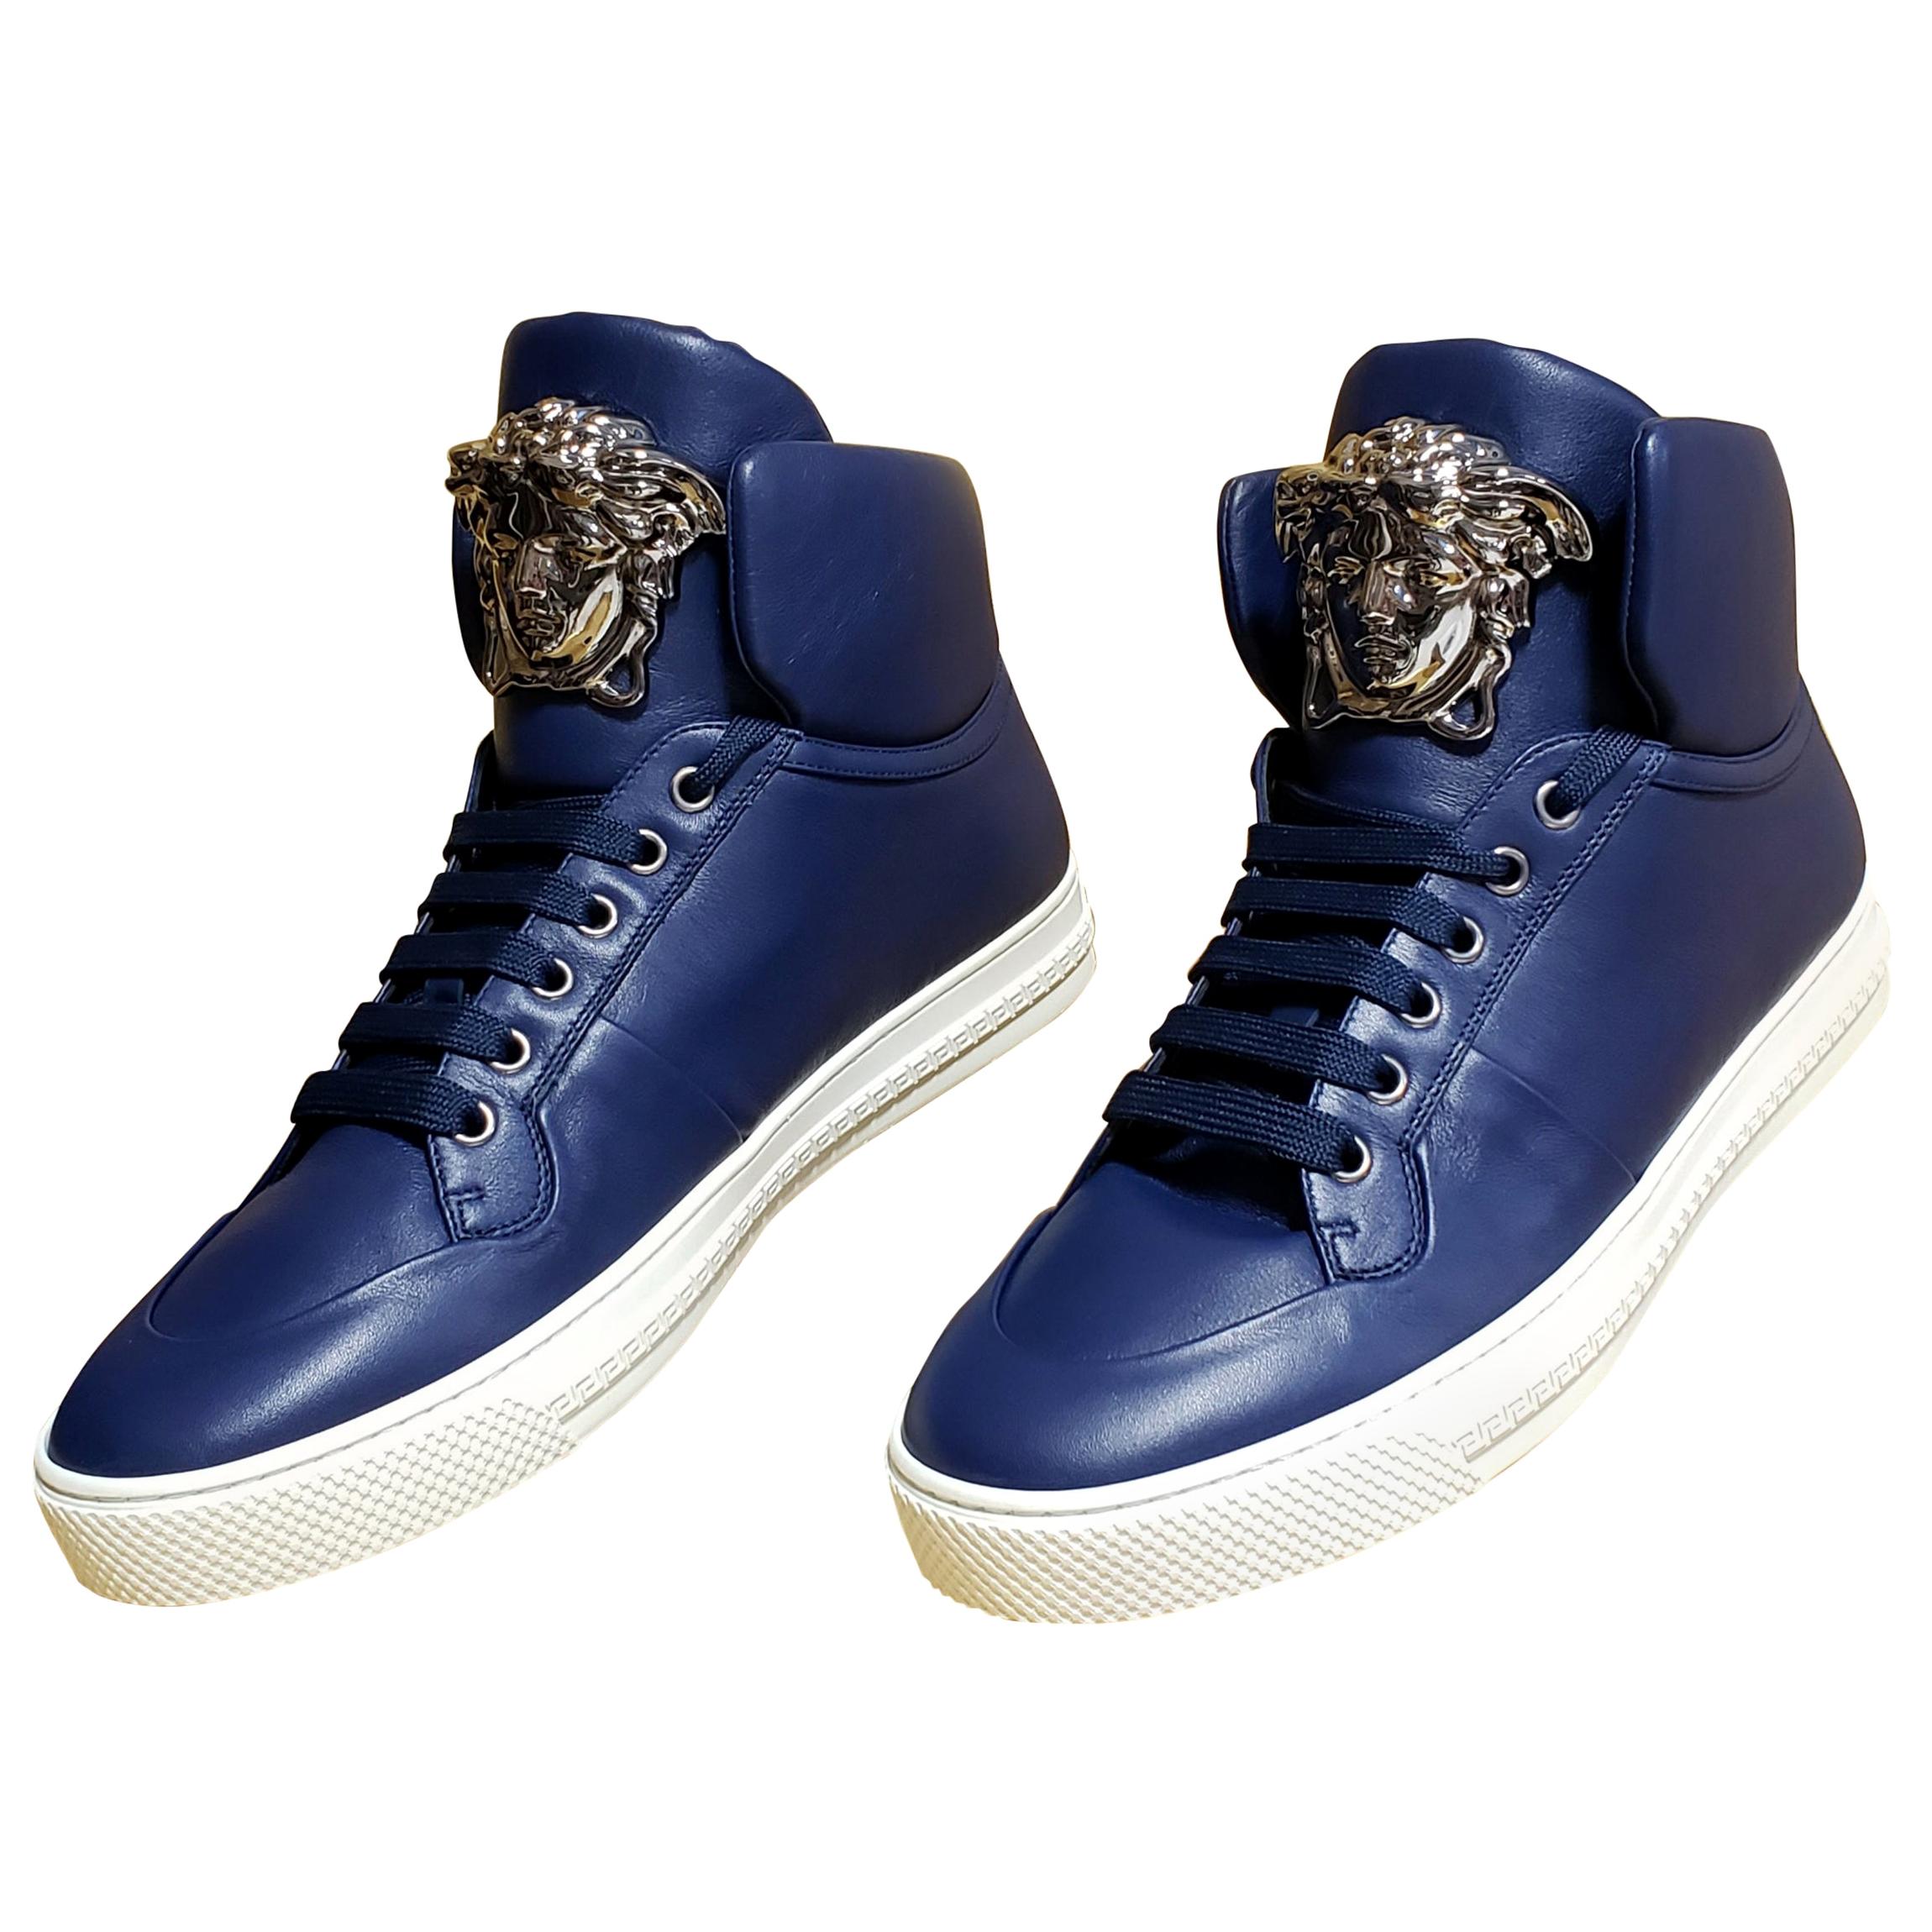 VERSACE DARK BLUE LEATHER PALAZZO HIGH-TOP Sneakers size IT39 - US 6 For Sale